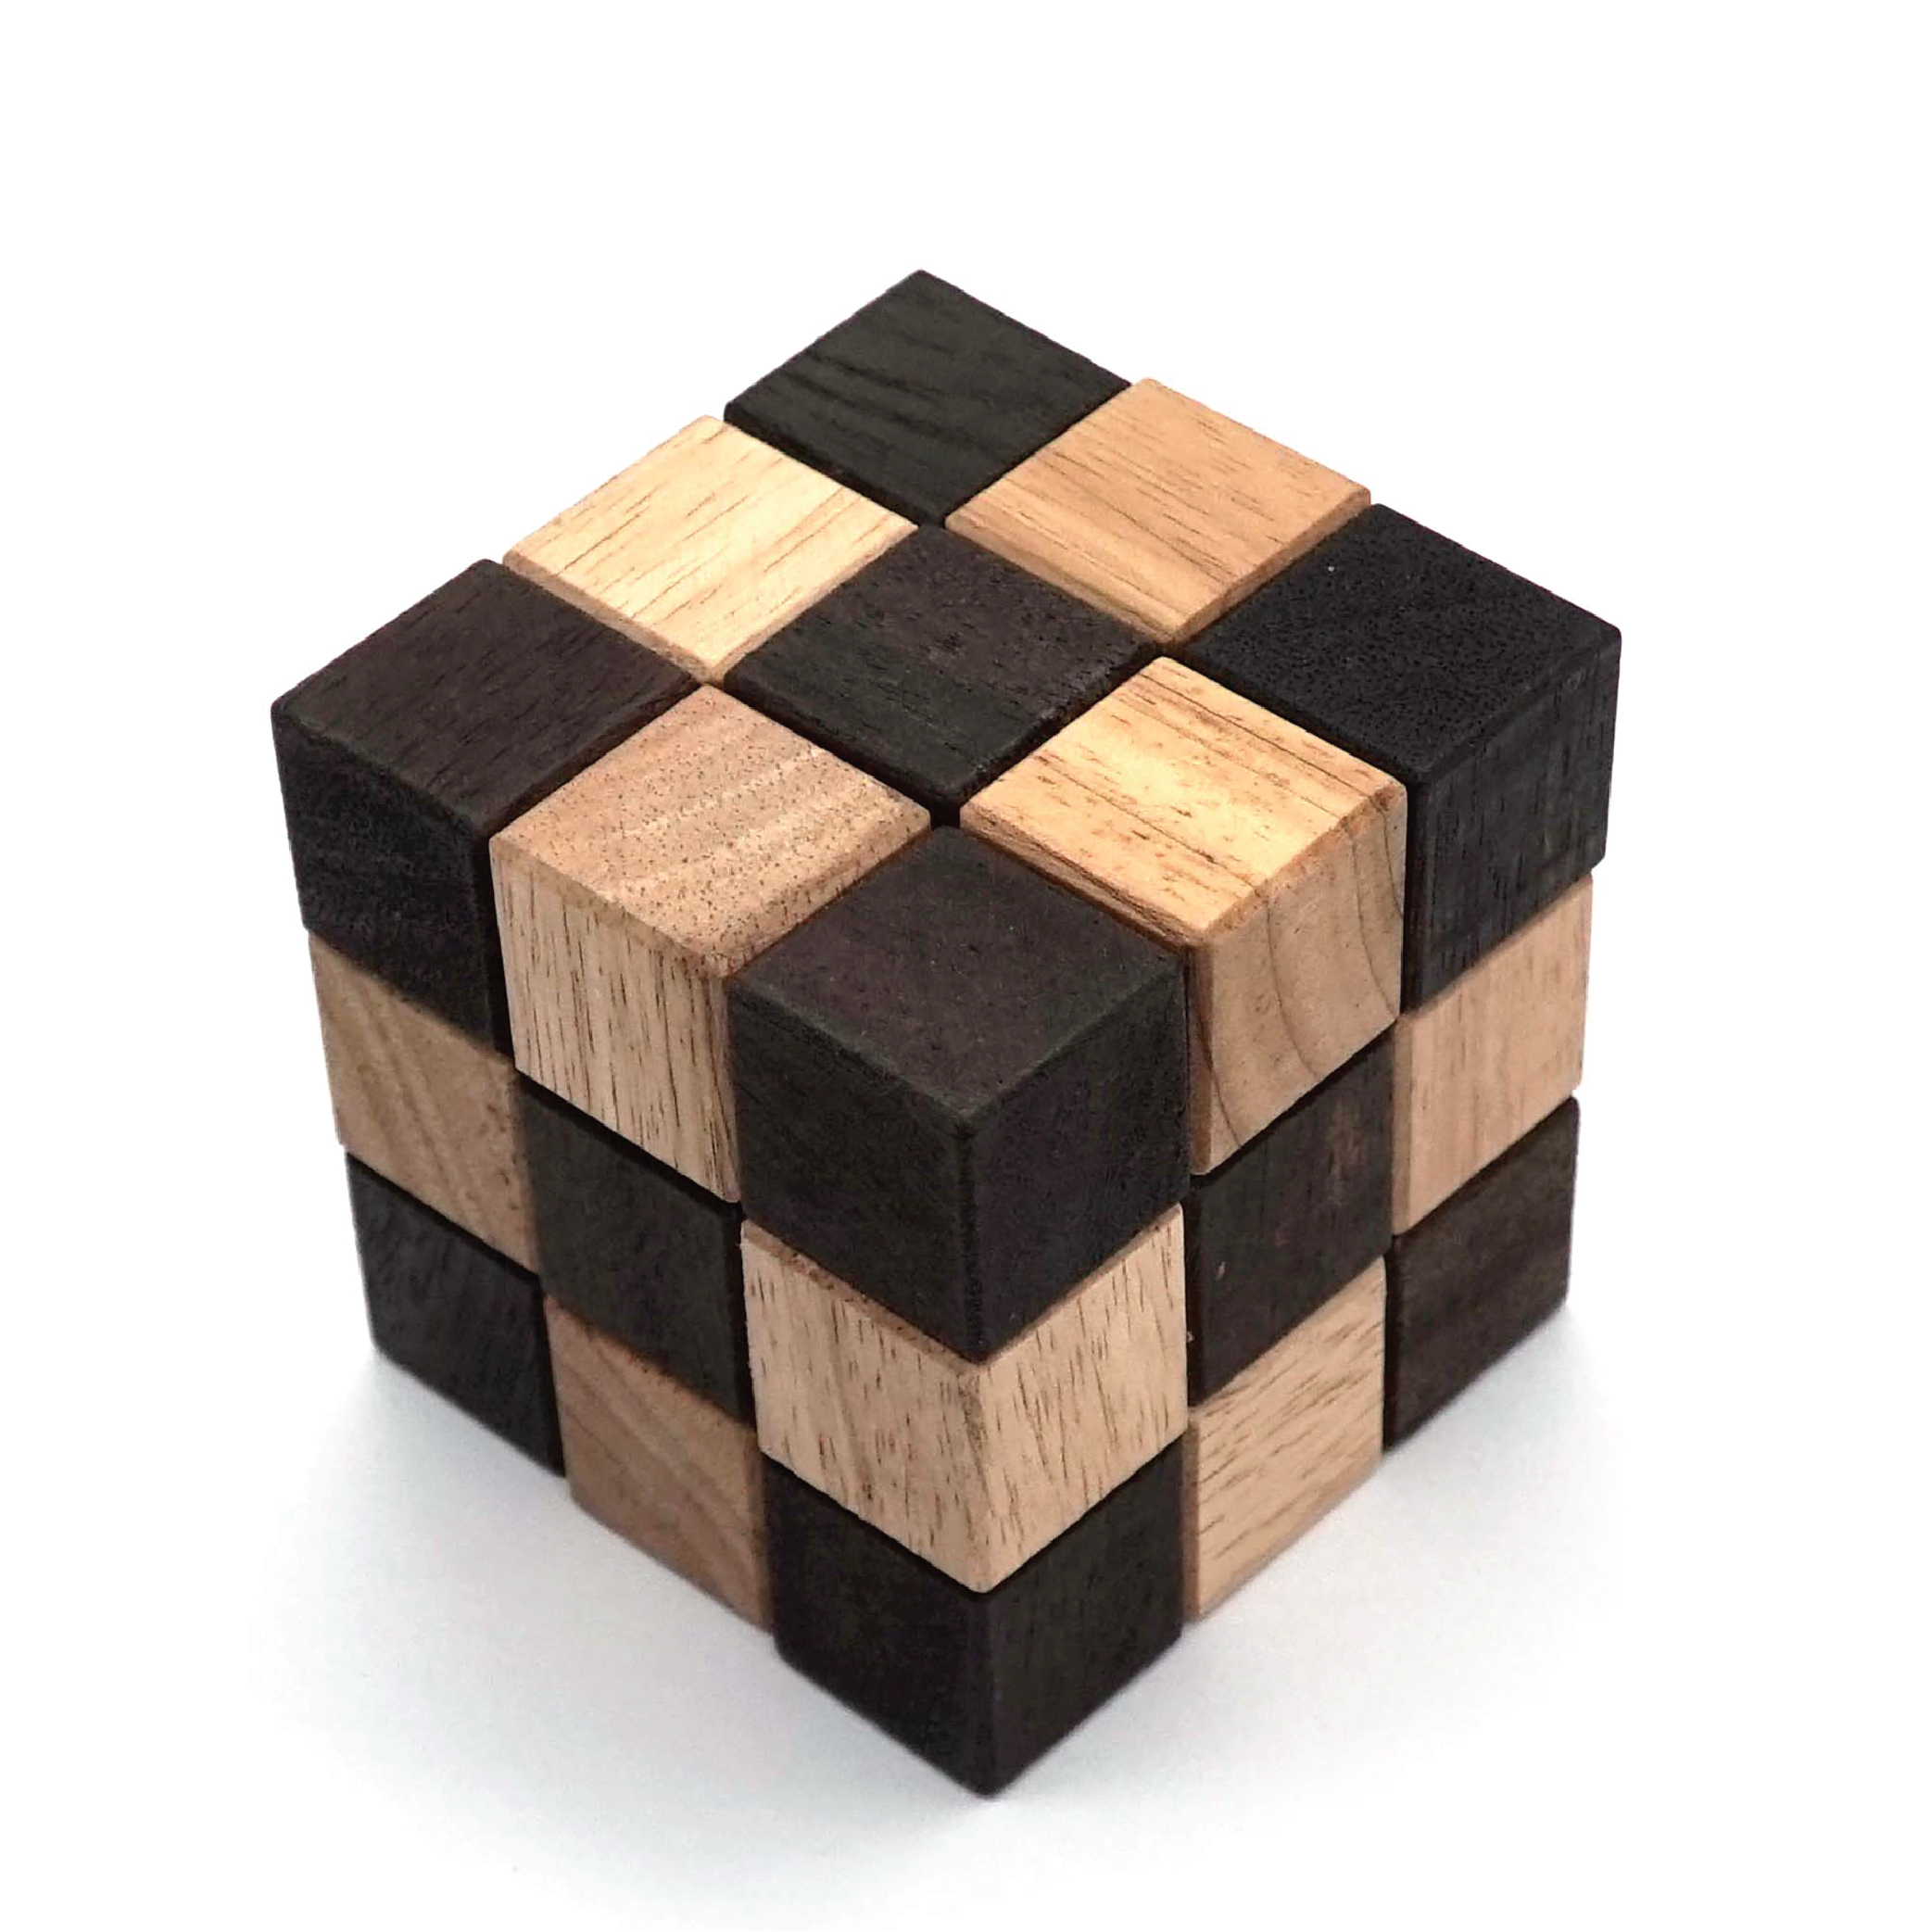 Snake Puzzle Cube and 3D Puzzles for Adults in Hands with Wooden Designs